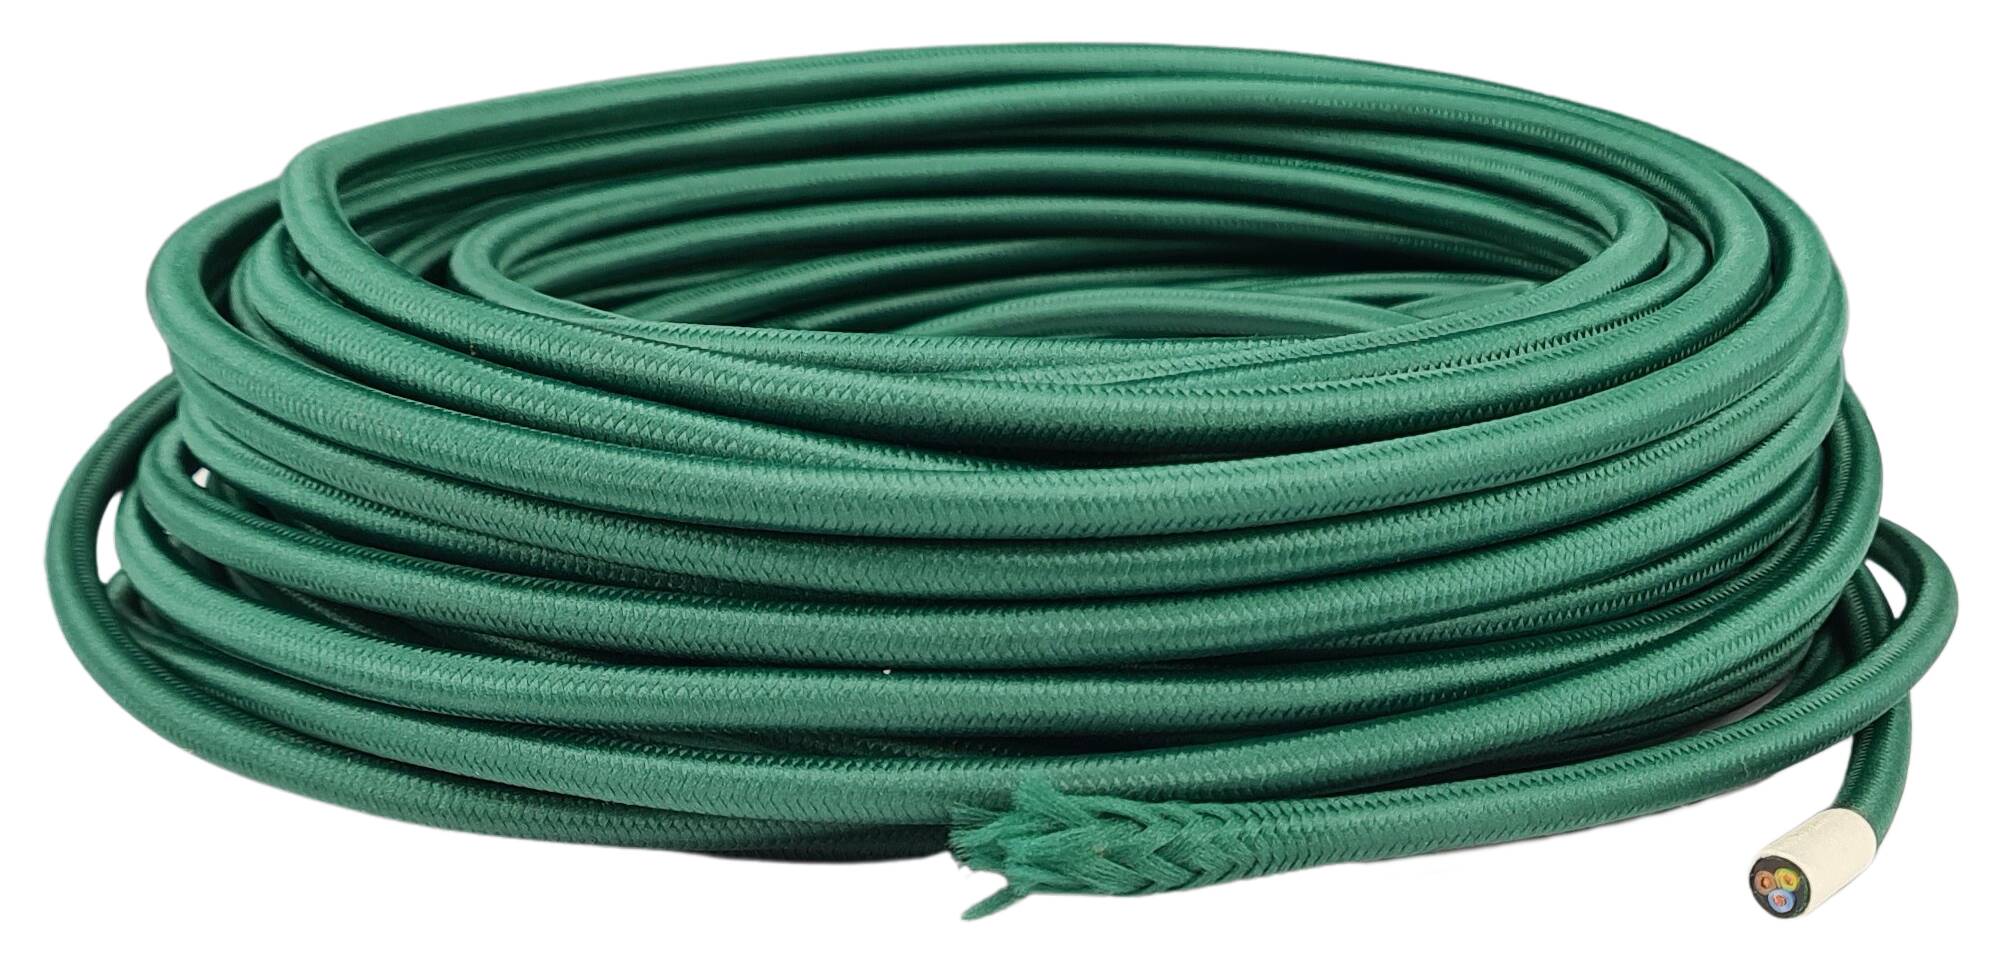 cable 3G 0,75 H33VV-F textile braided RAL 6035 pearl green